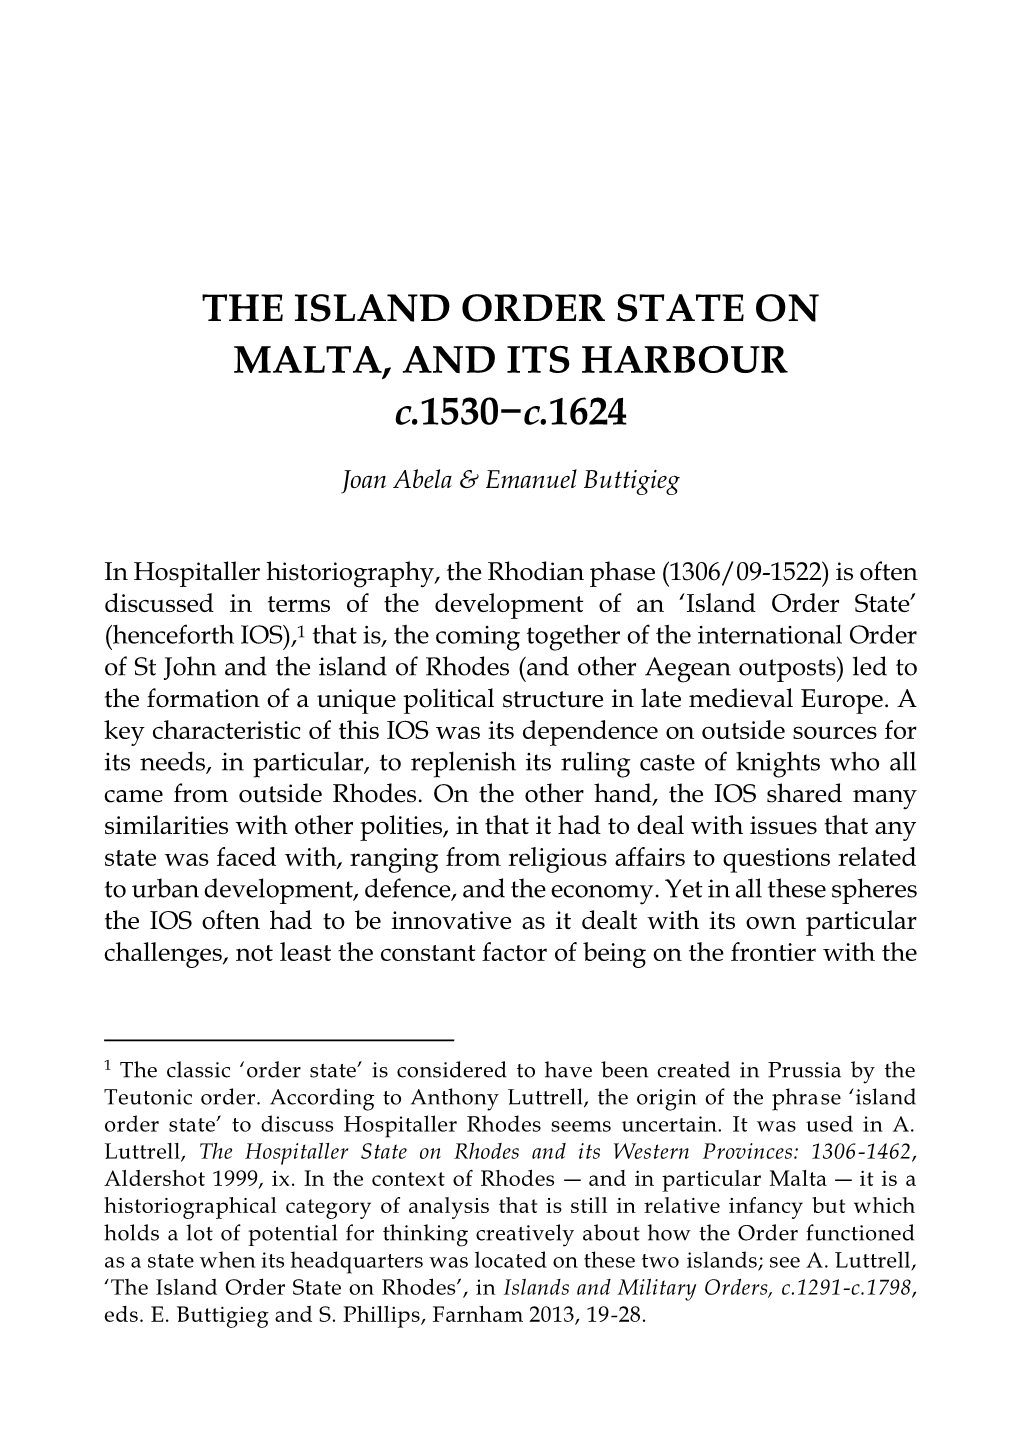 THE ISLAND ORDER STATE on MALTA, and ITS HARBOUR C.1530−C.1624